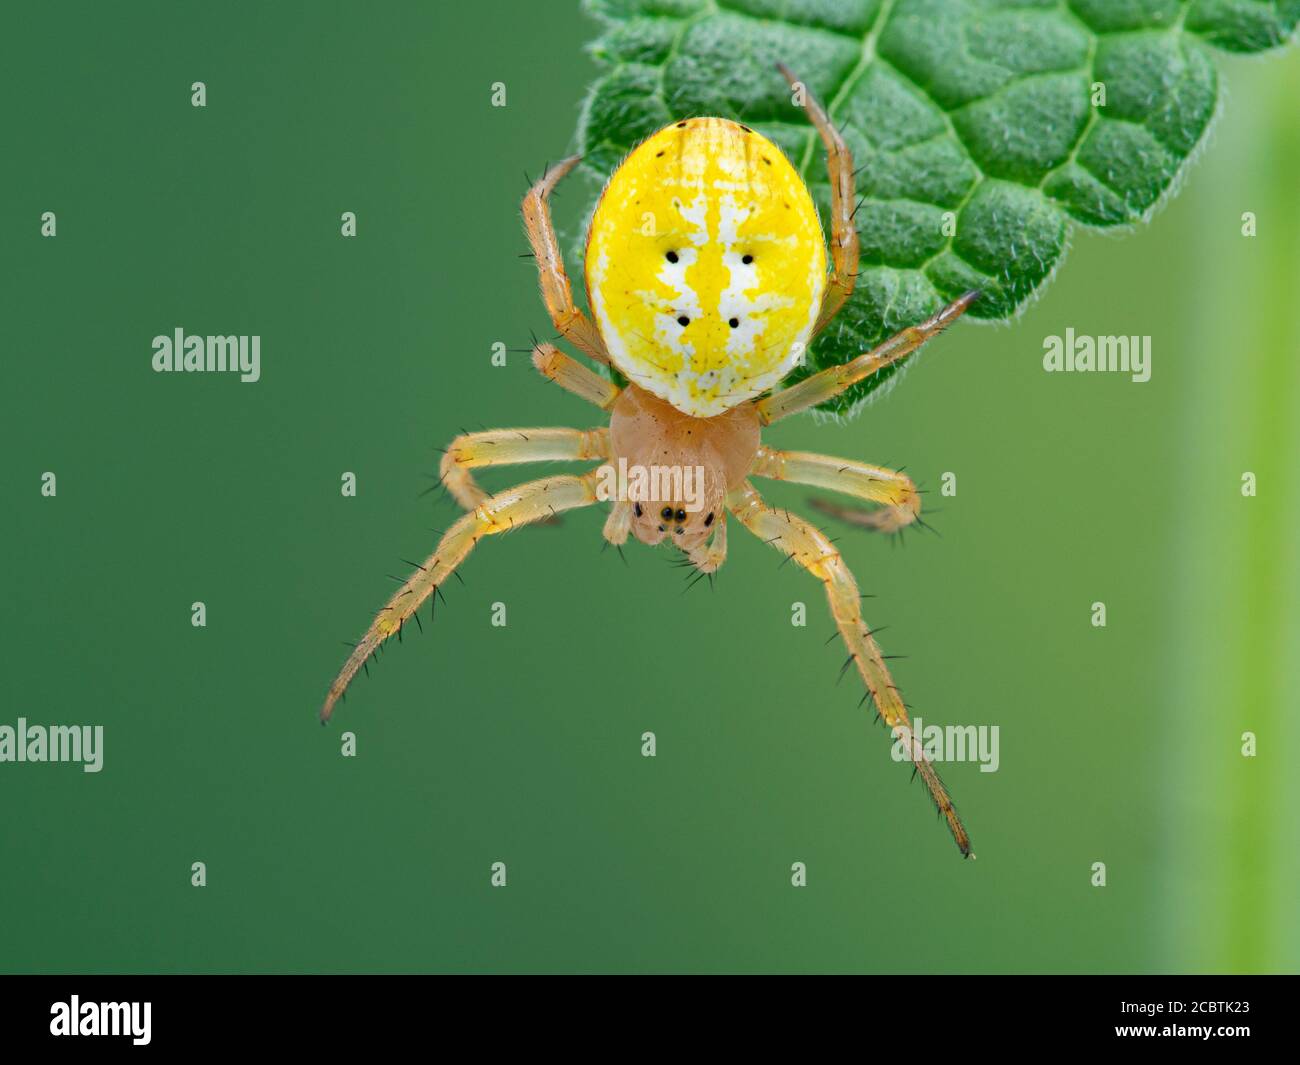 Dorsal view of the face of a colourful sixspotted orbweaver spider (Araniella displicata) on a leaf, Deas Isand, Delta, British Columbia, Canada Stock Photo